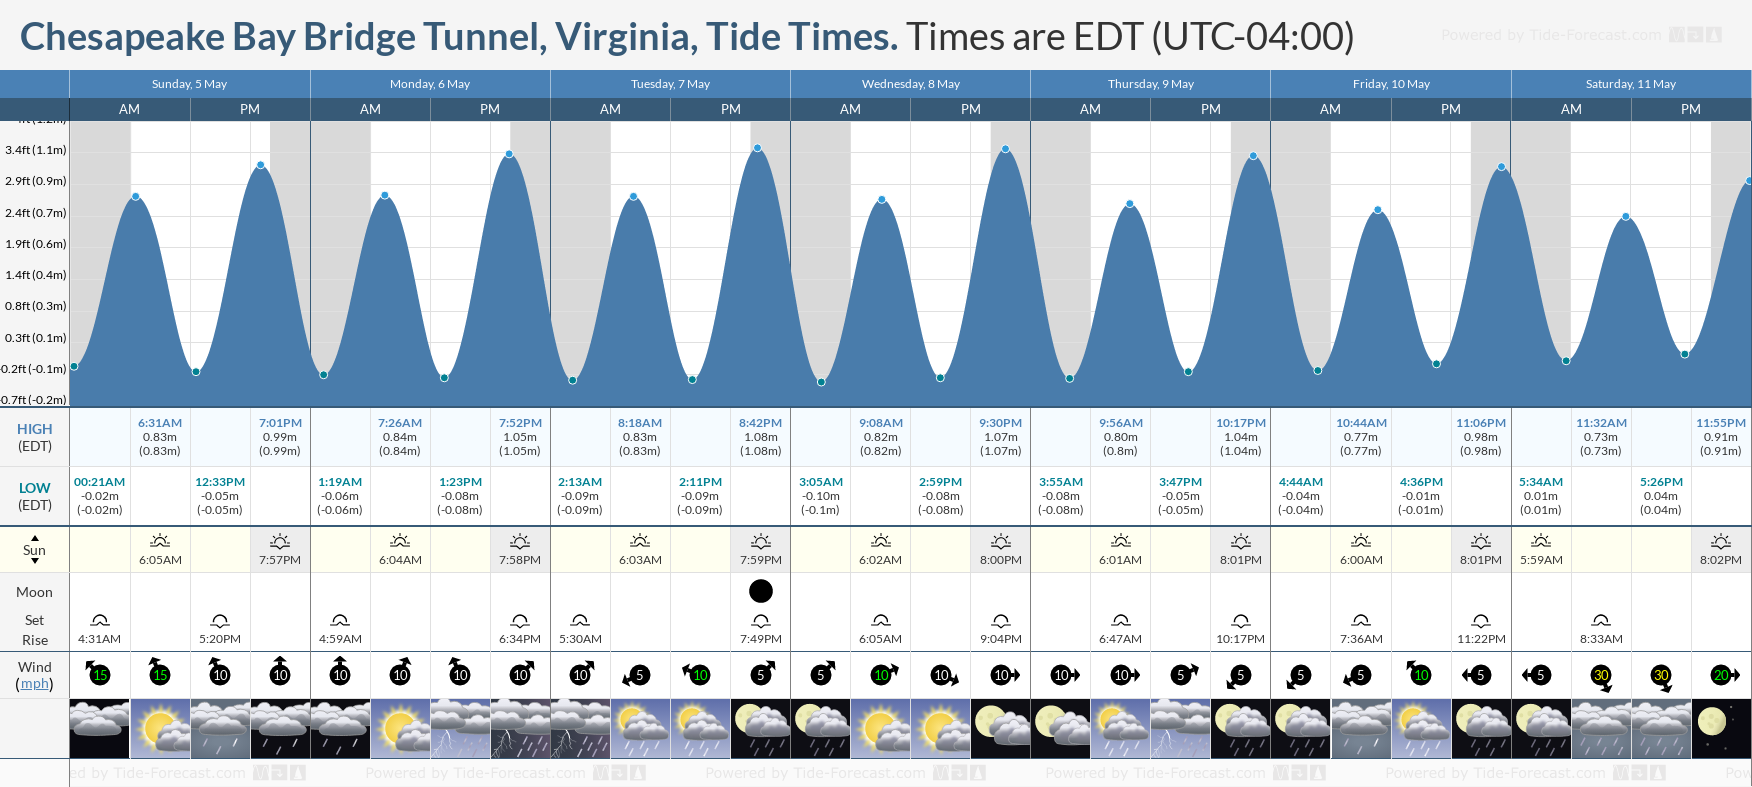 Chesapeake Bay Bridge Tunnel, Virginia Tide Chart including high and low tide tide times for the next 7 days